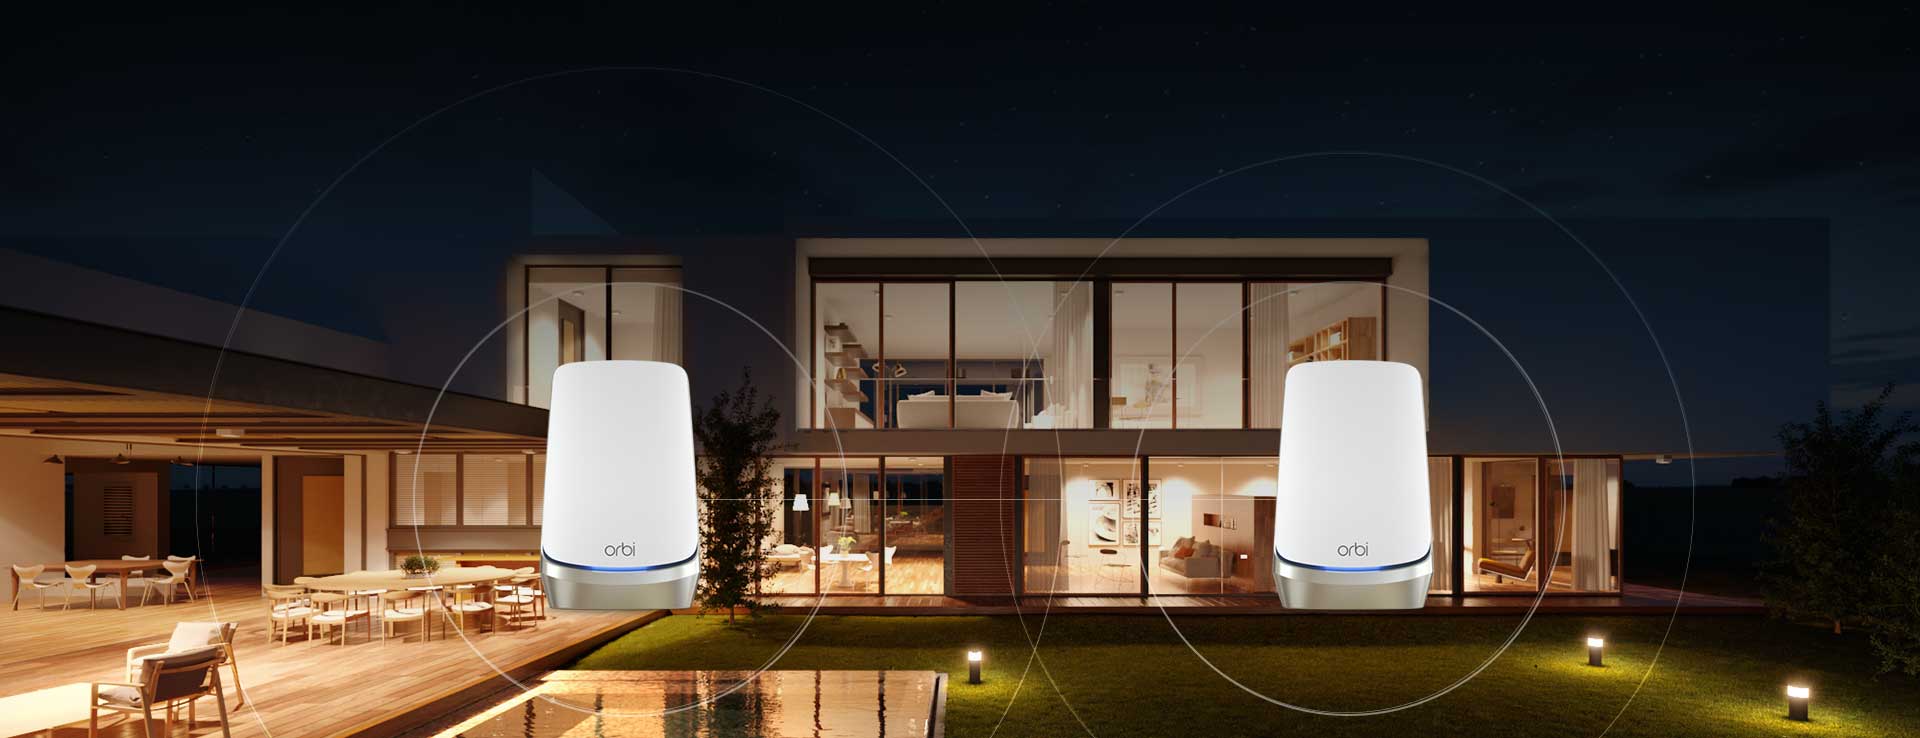 RBKe962 The world's most powerful WiFi system